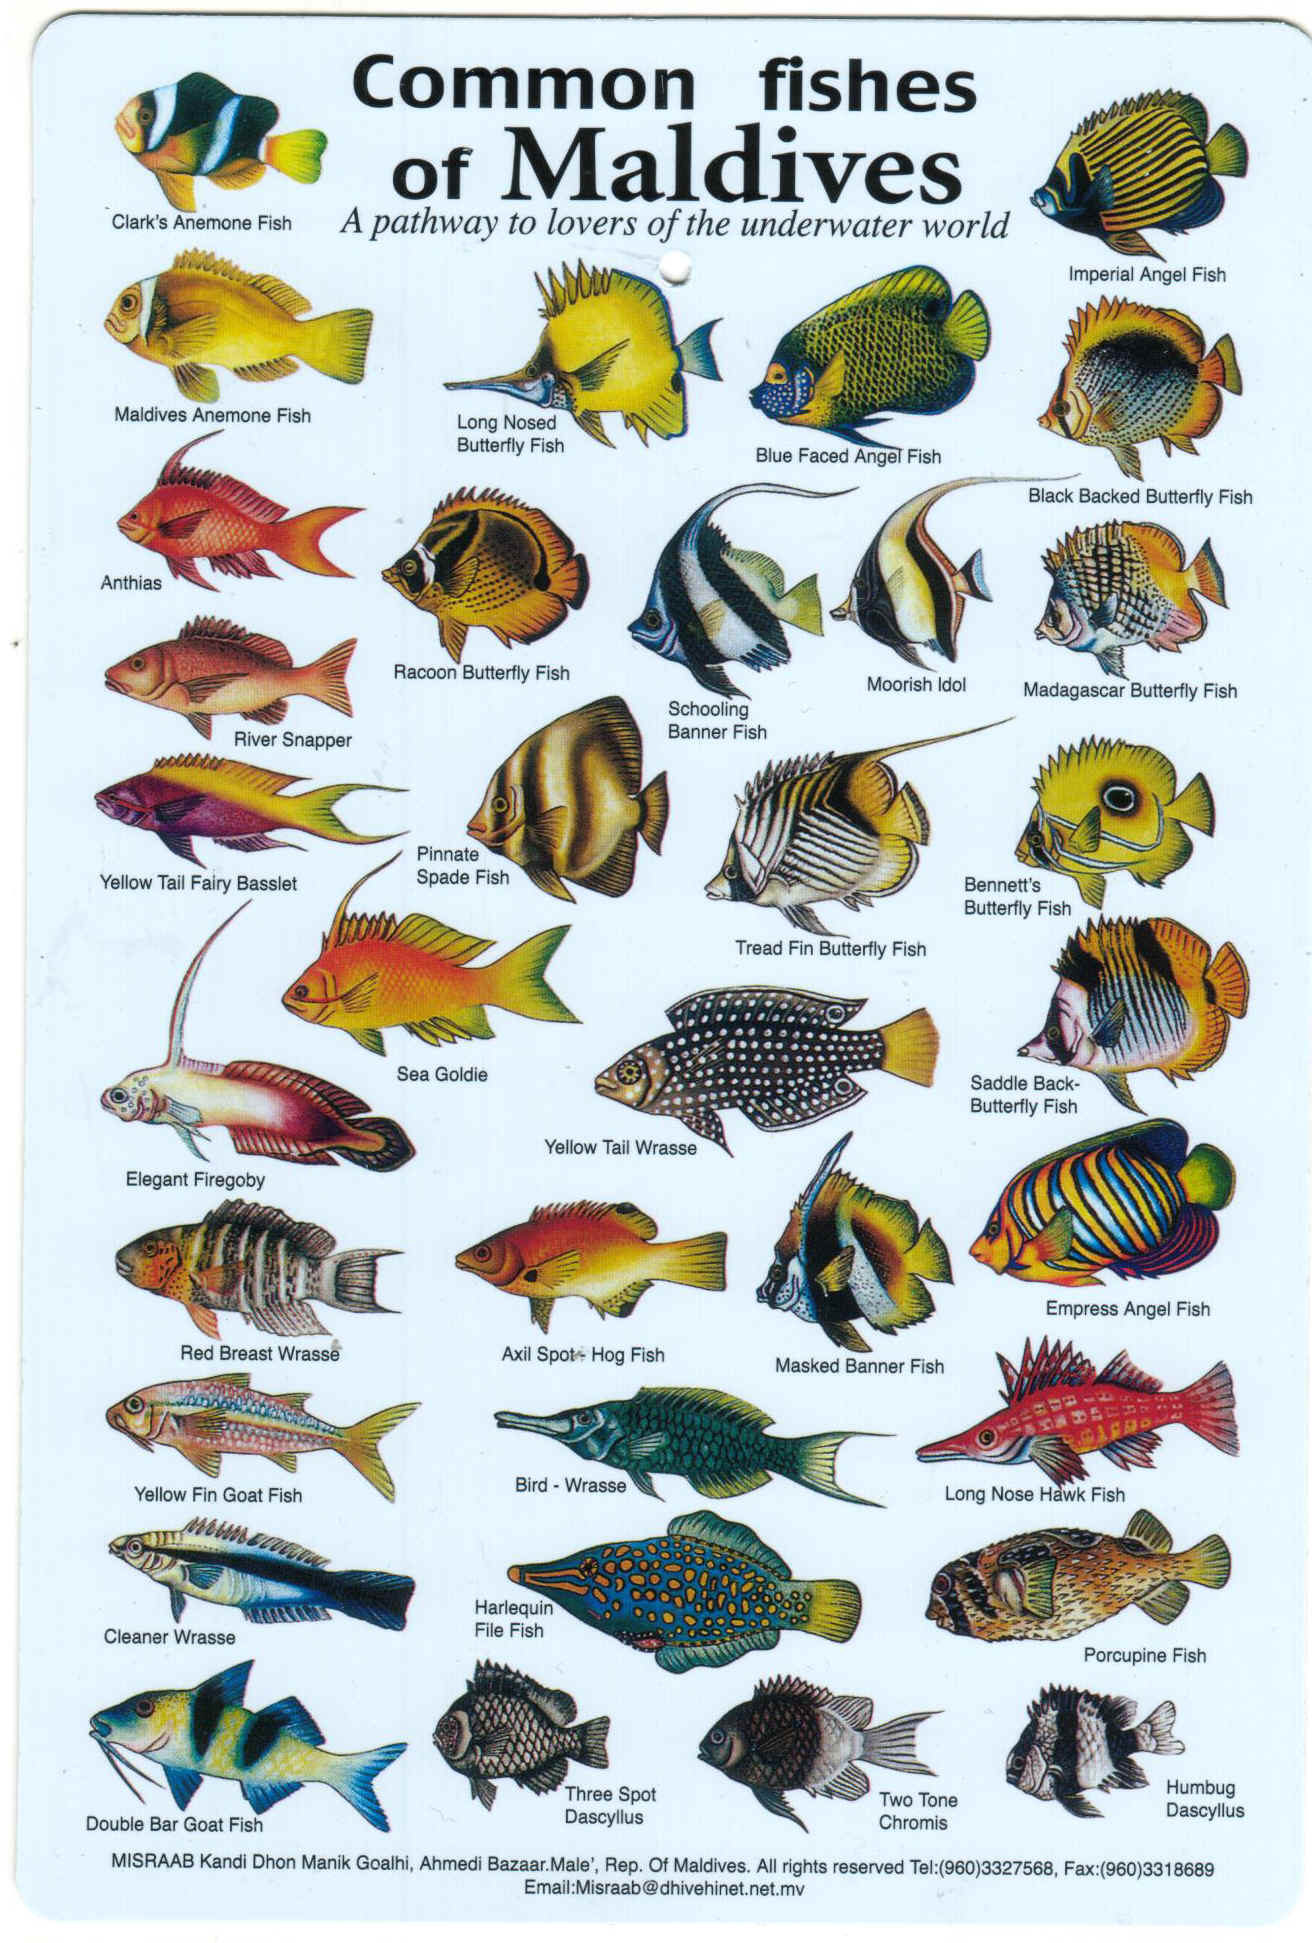 Fishes of the Maldives Identification Chart (water resistant double-sided-printed on card then laminated)